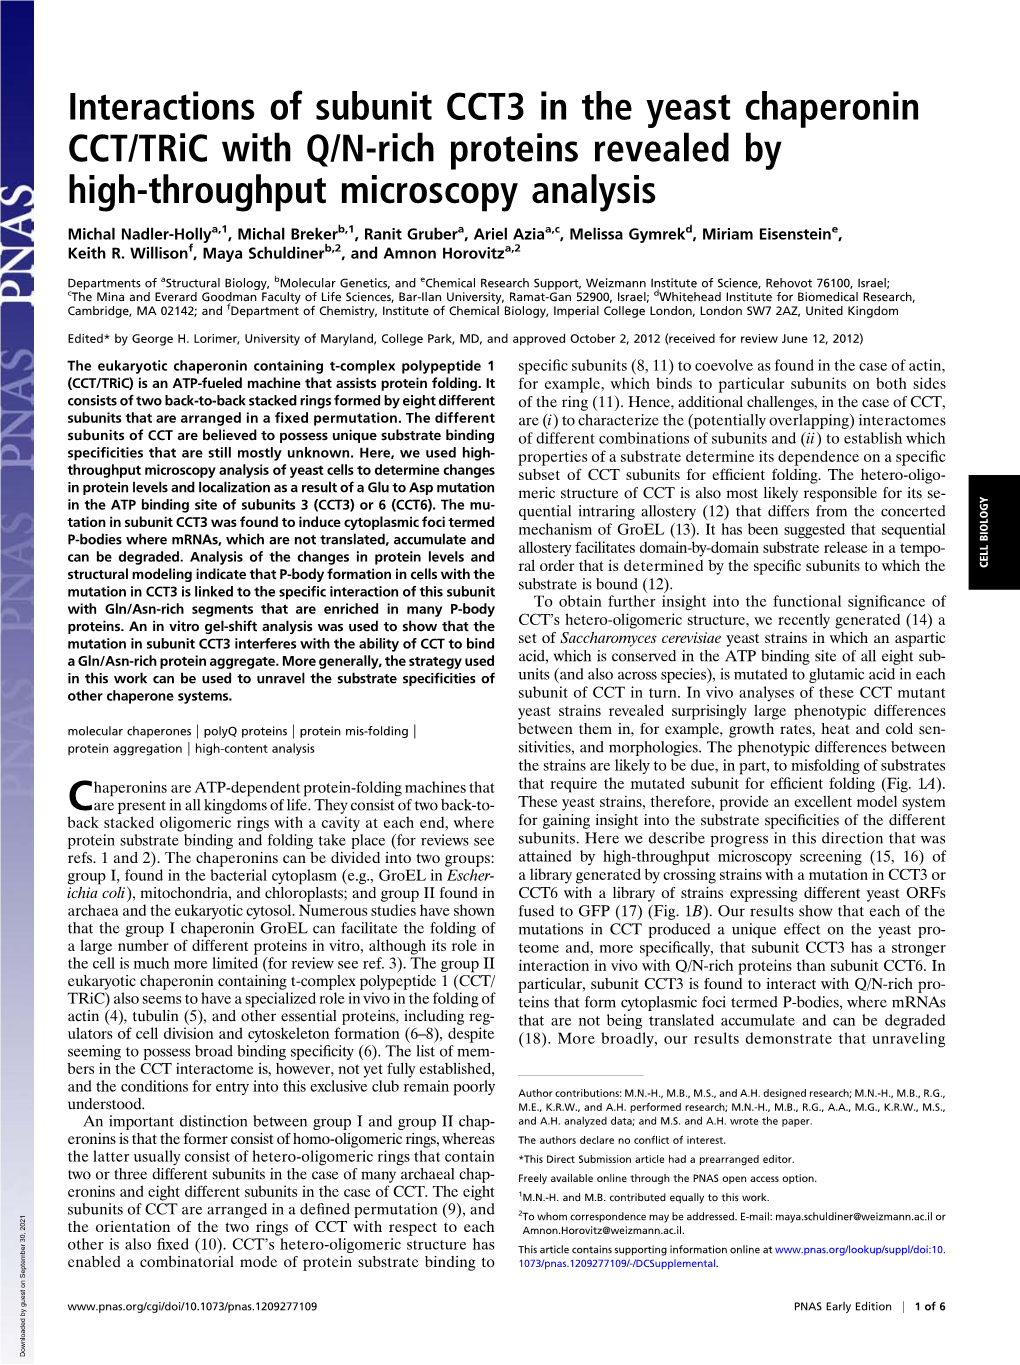 Interactions of Subunit CCT3 in the Yeast Chaperonin CCT/Tric with Q/N-Rich Proteins Revealed by High-Throughput Microscopy Analysis